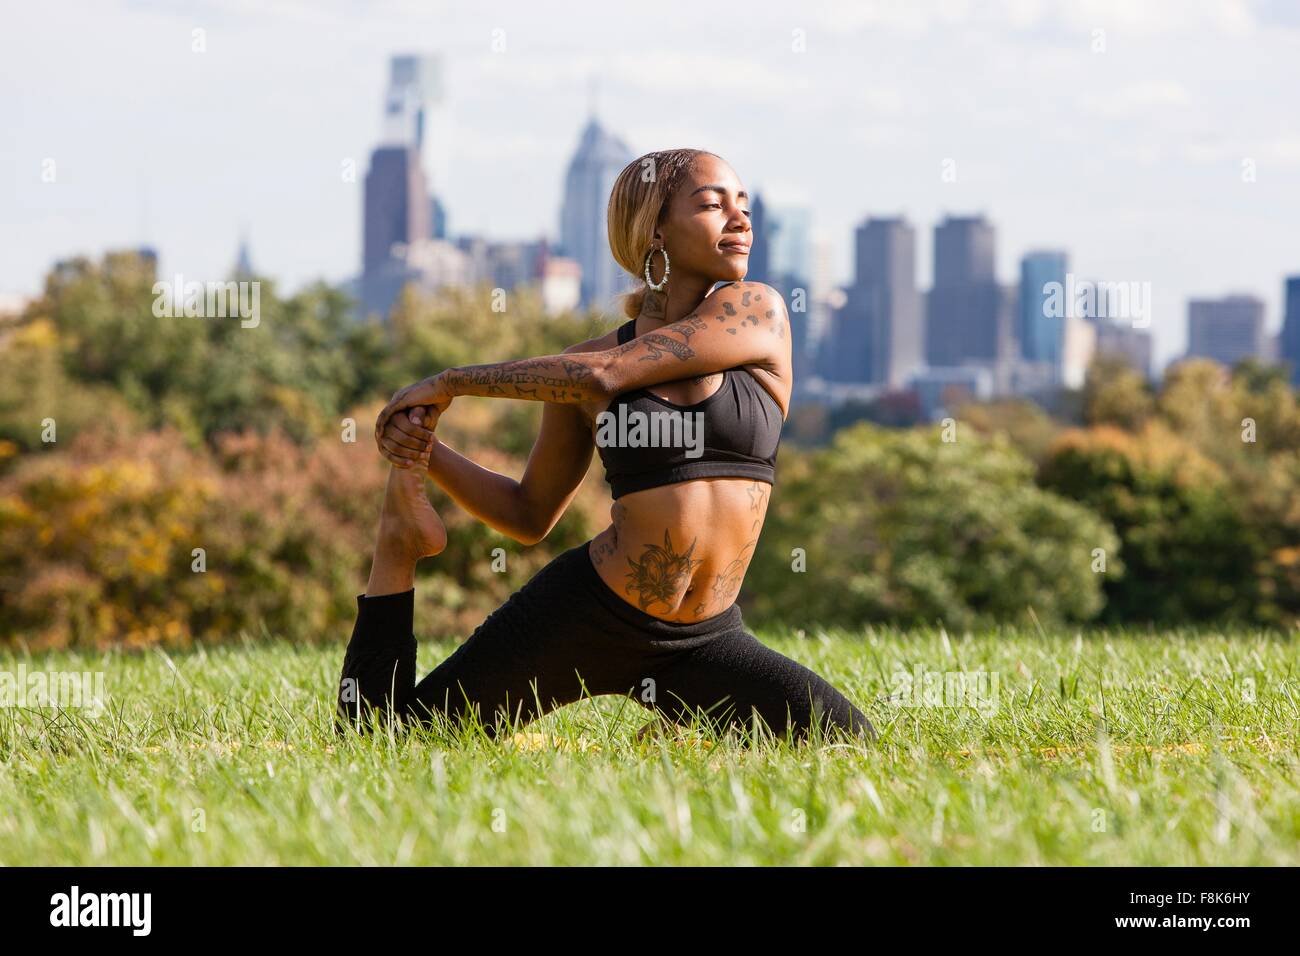 Front view of young woman kneeling on grass stretching leg in yoga position, looking away, Philadelphia, Pennsylvania, USA Stock Photo